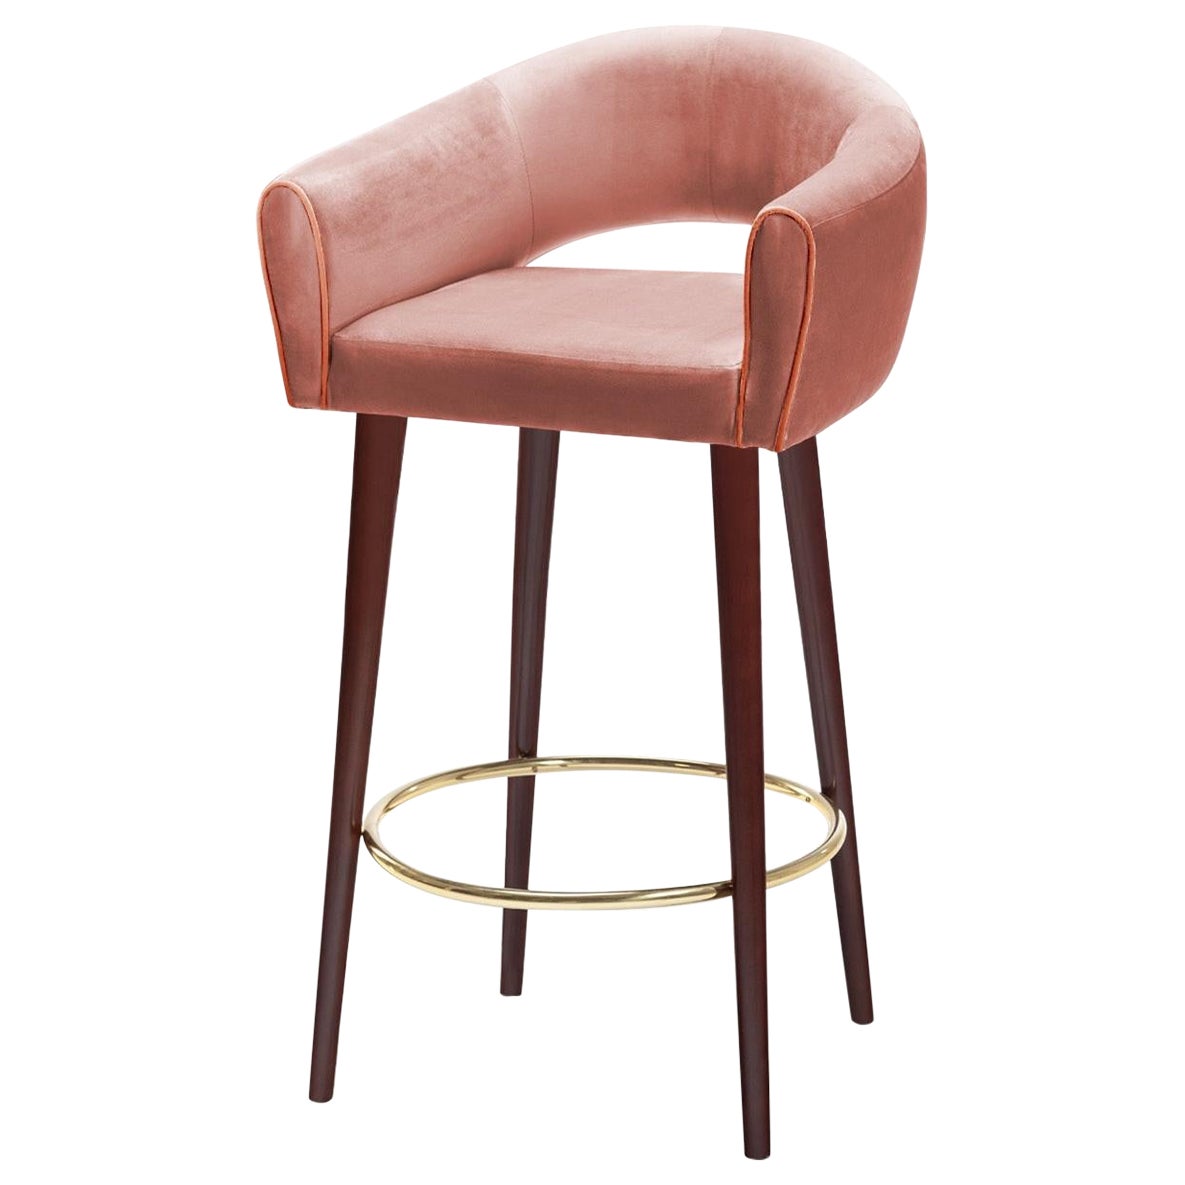 Stylish and elegant, grace bar stool is extremely comfortable in its perfect finishing’s. With its smooth edges, grace has definitely a familiar retro feeling. A perfect combination of highly comfortable and perfectly tailored upholstery with the